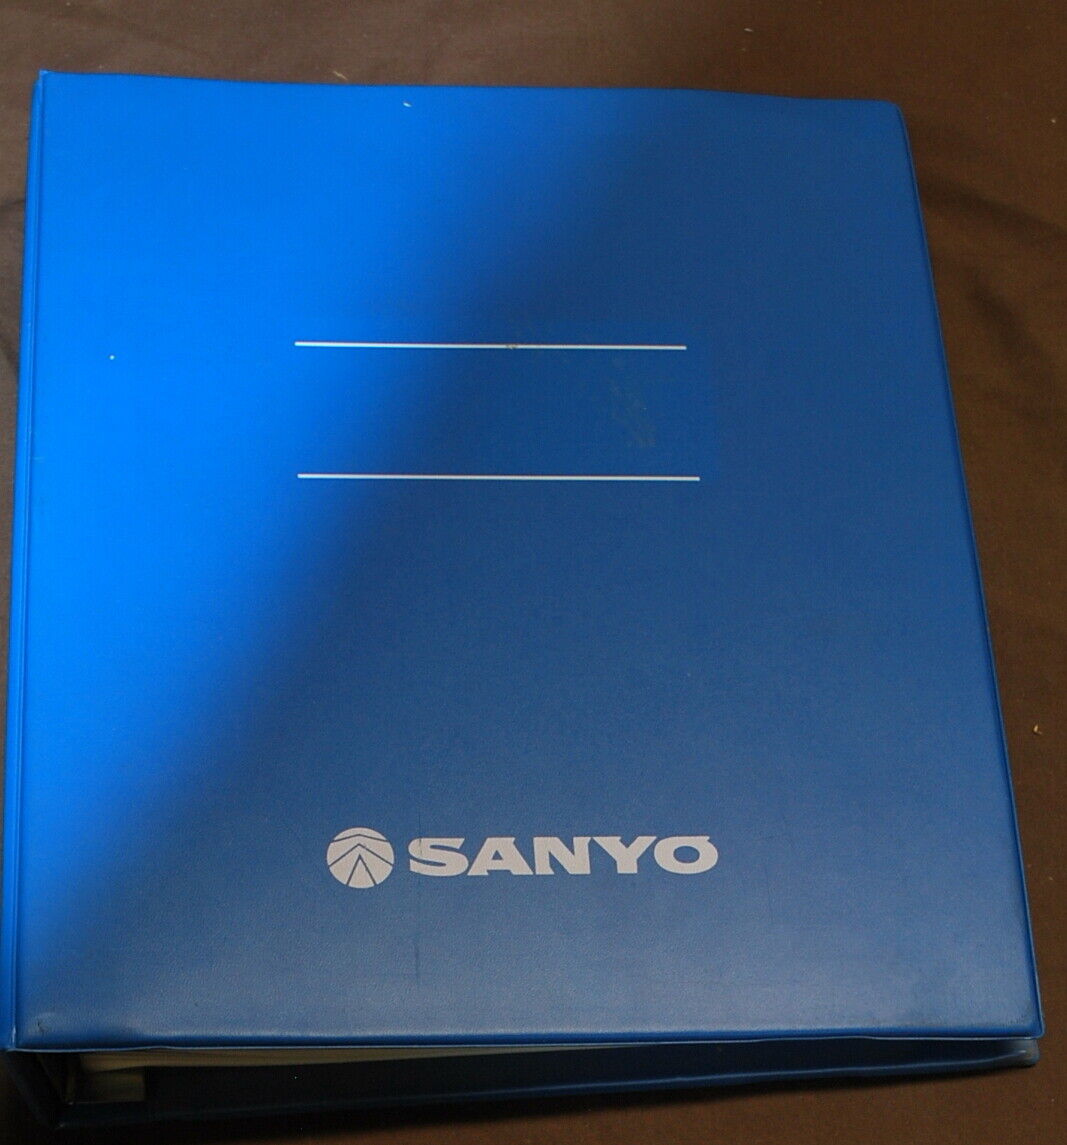 Sanyo MBC-1100 Series User's Guide and Software Encyclopedia - ships worldwide